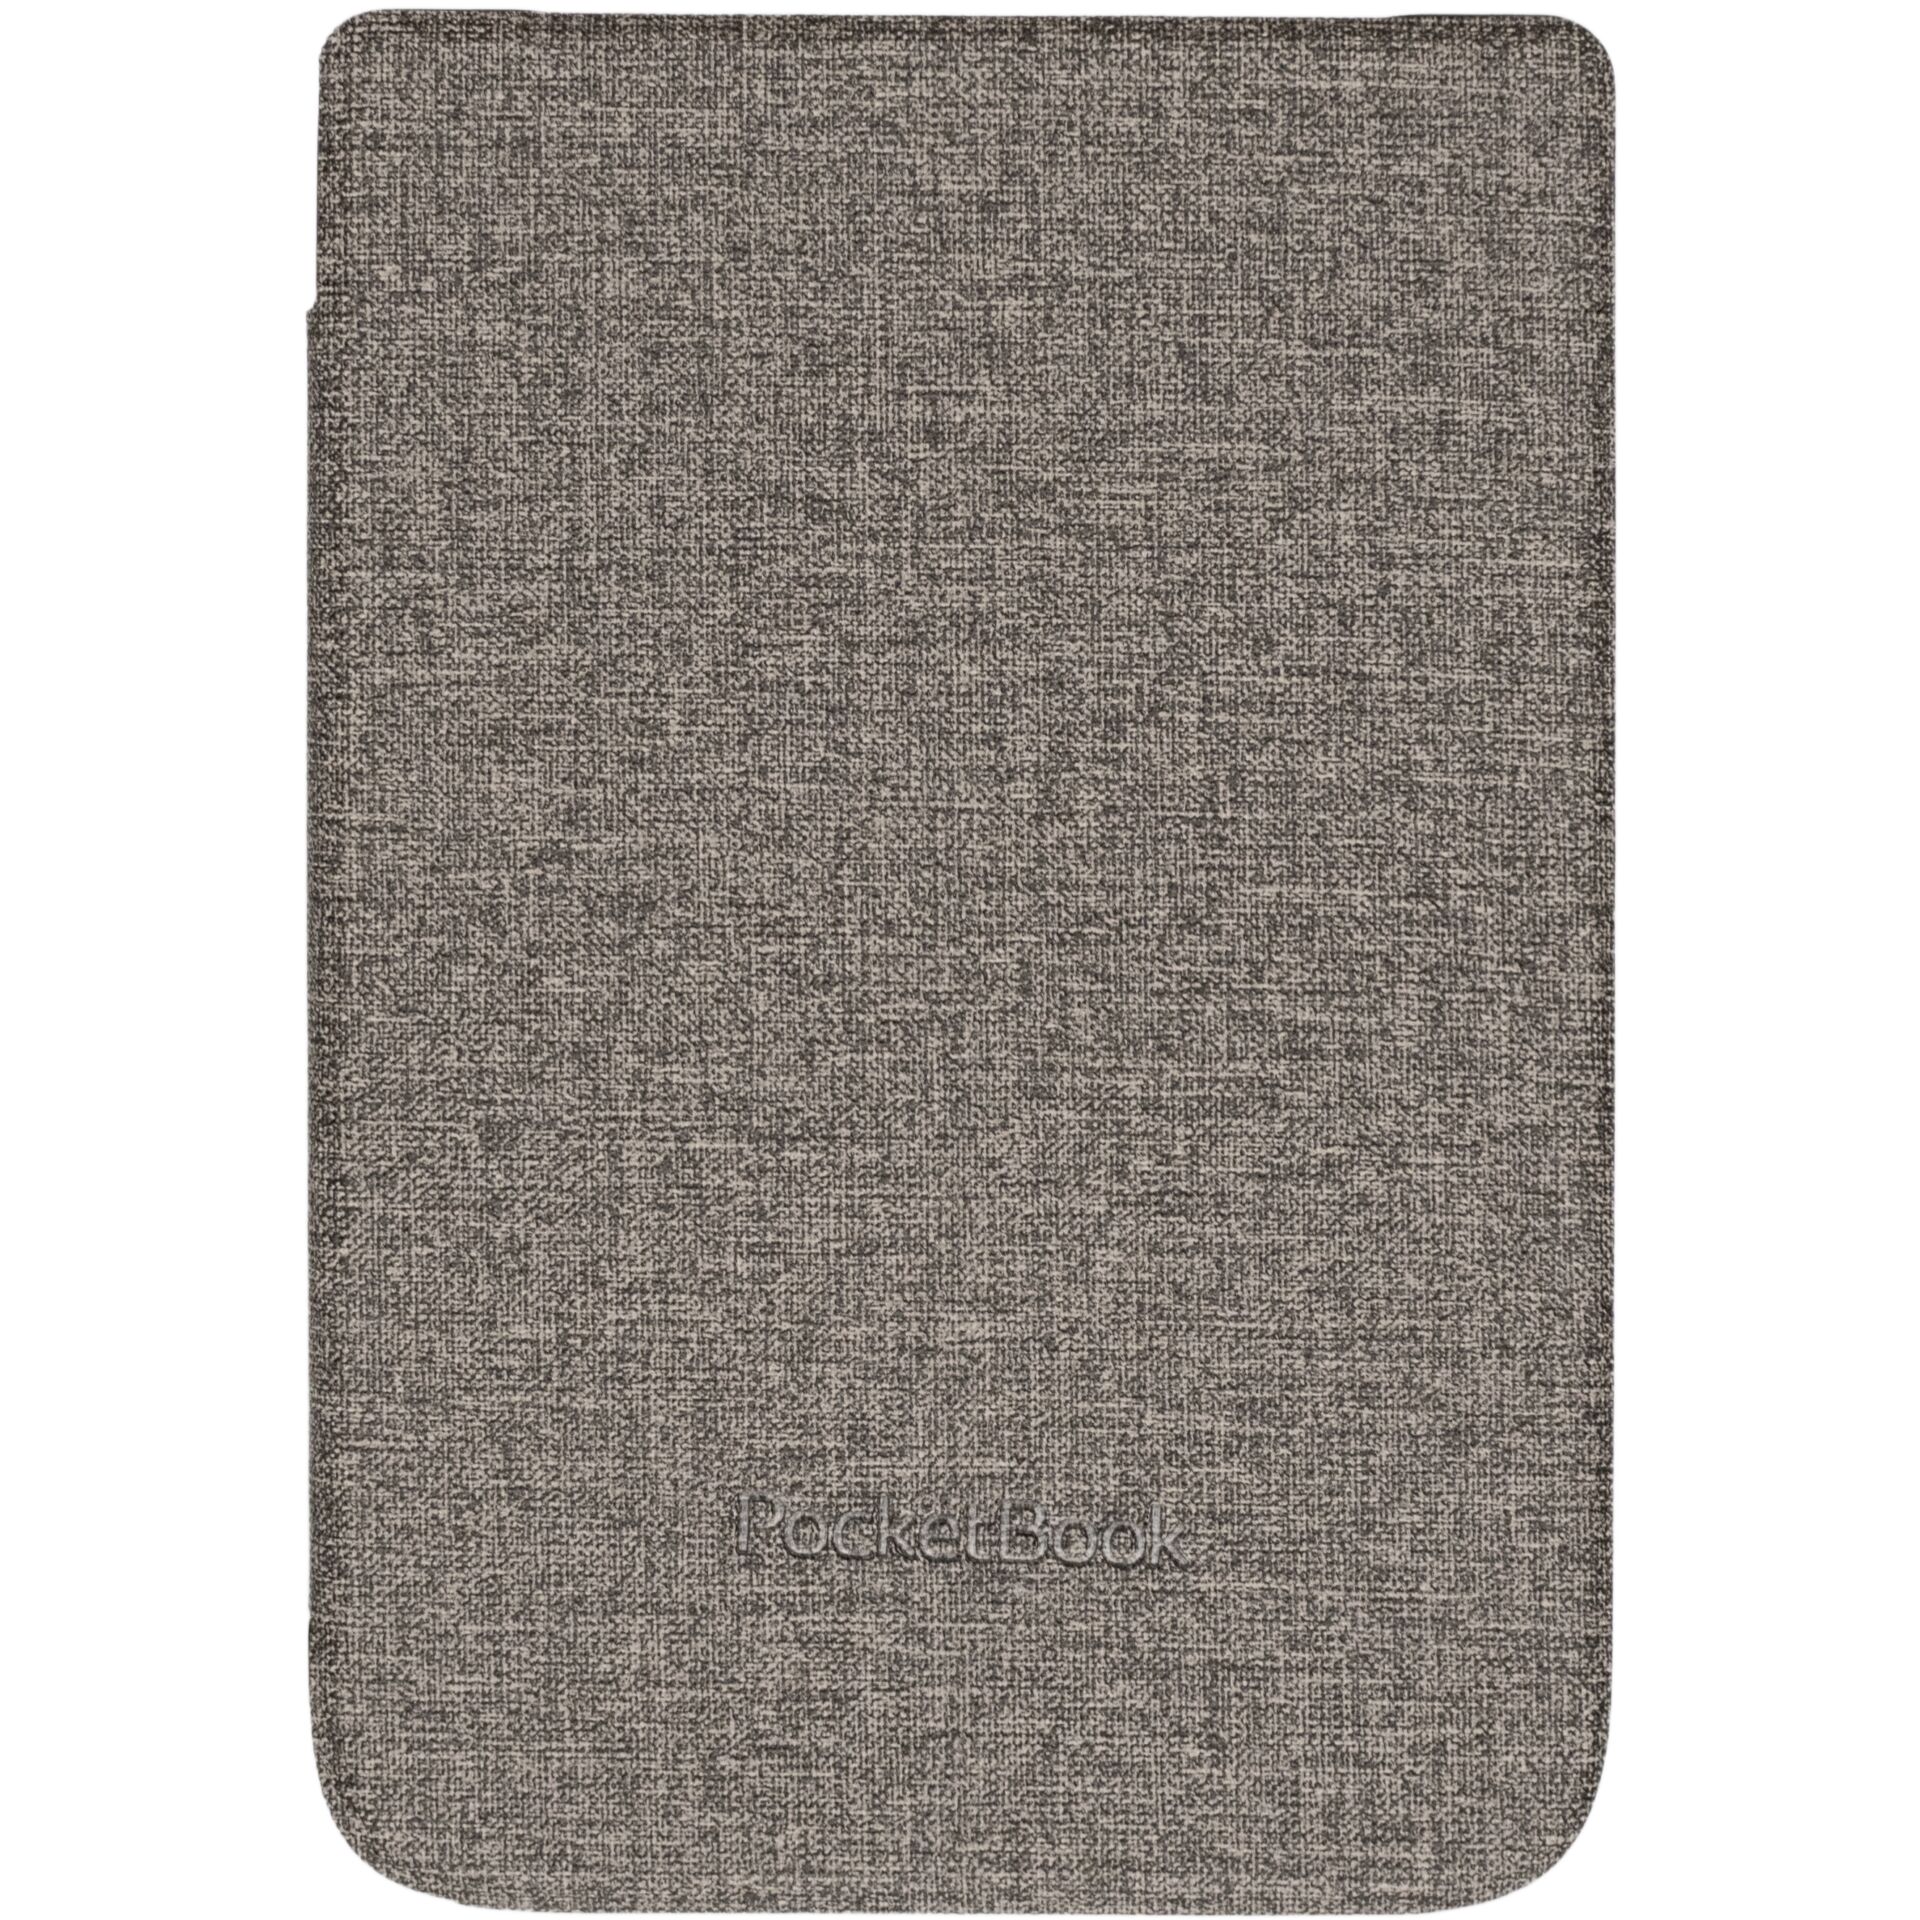 Pocketbook Shell Grey Cover for Color